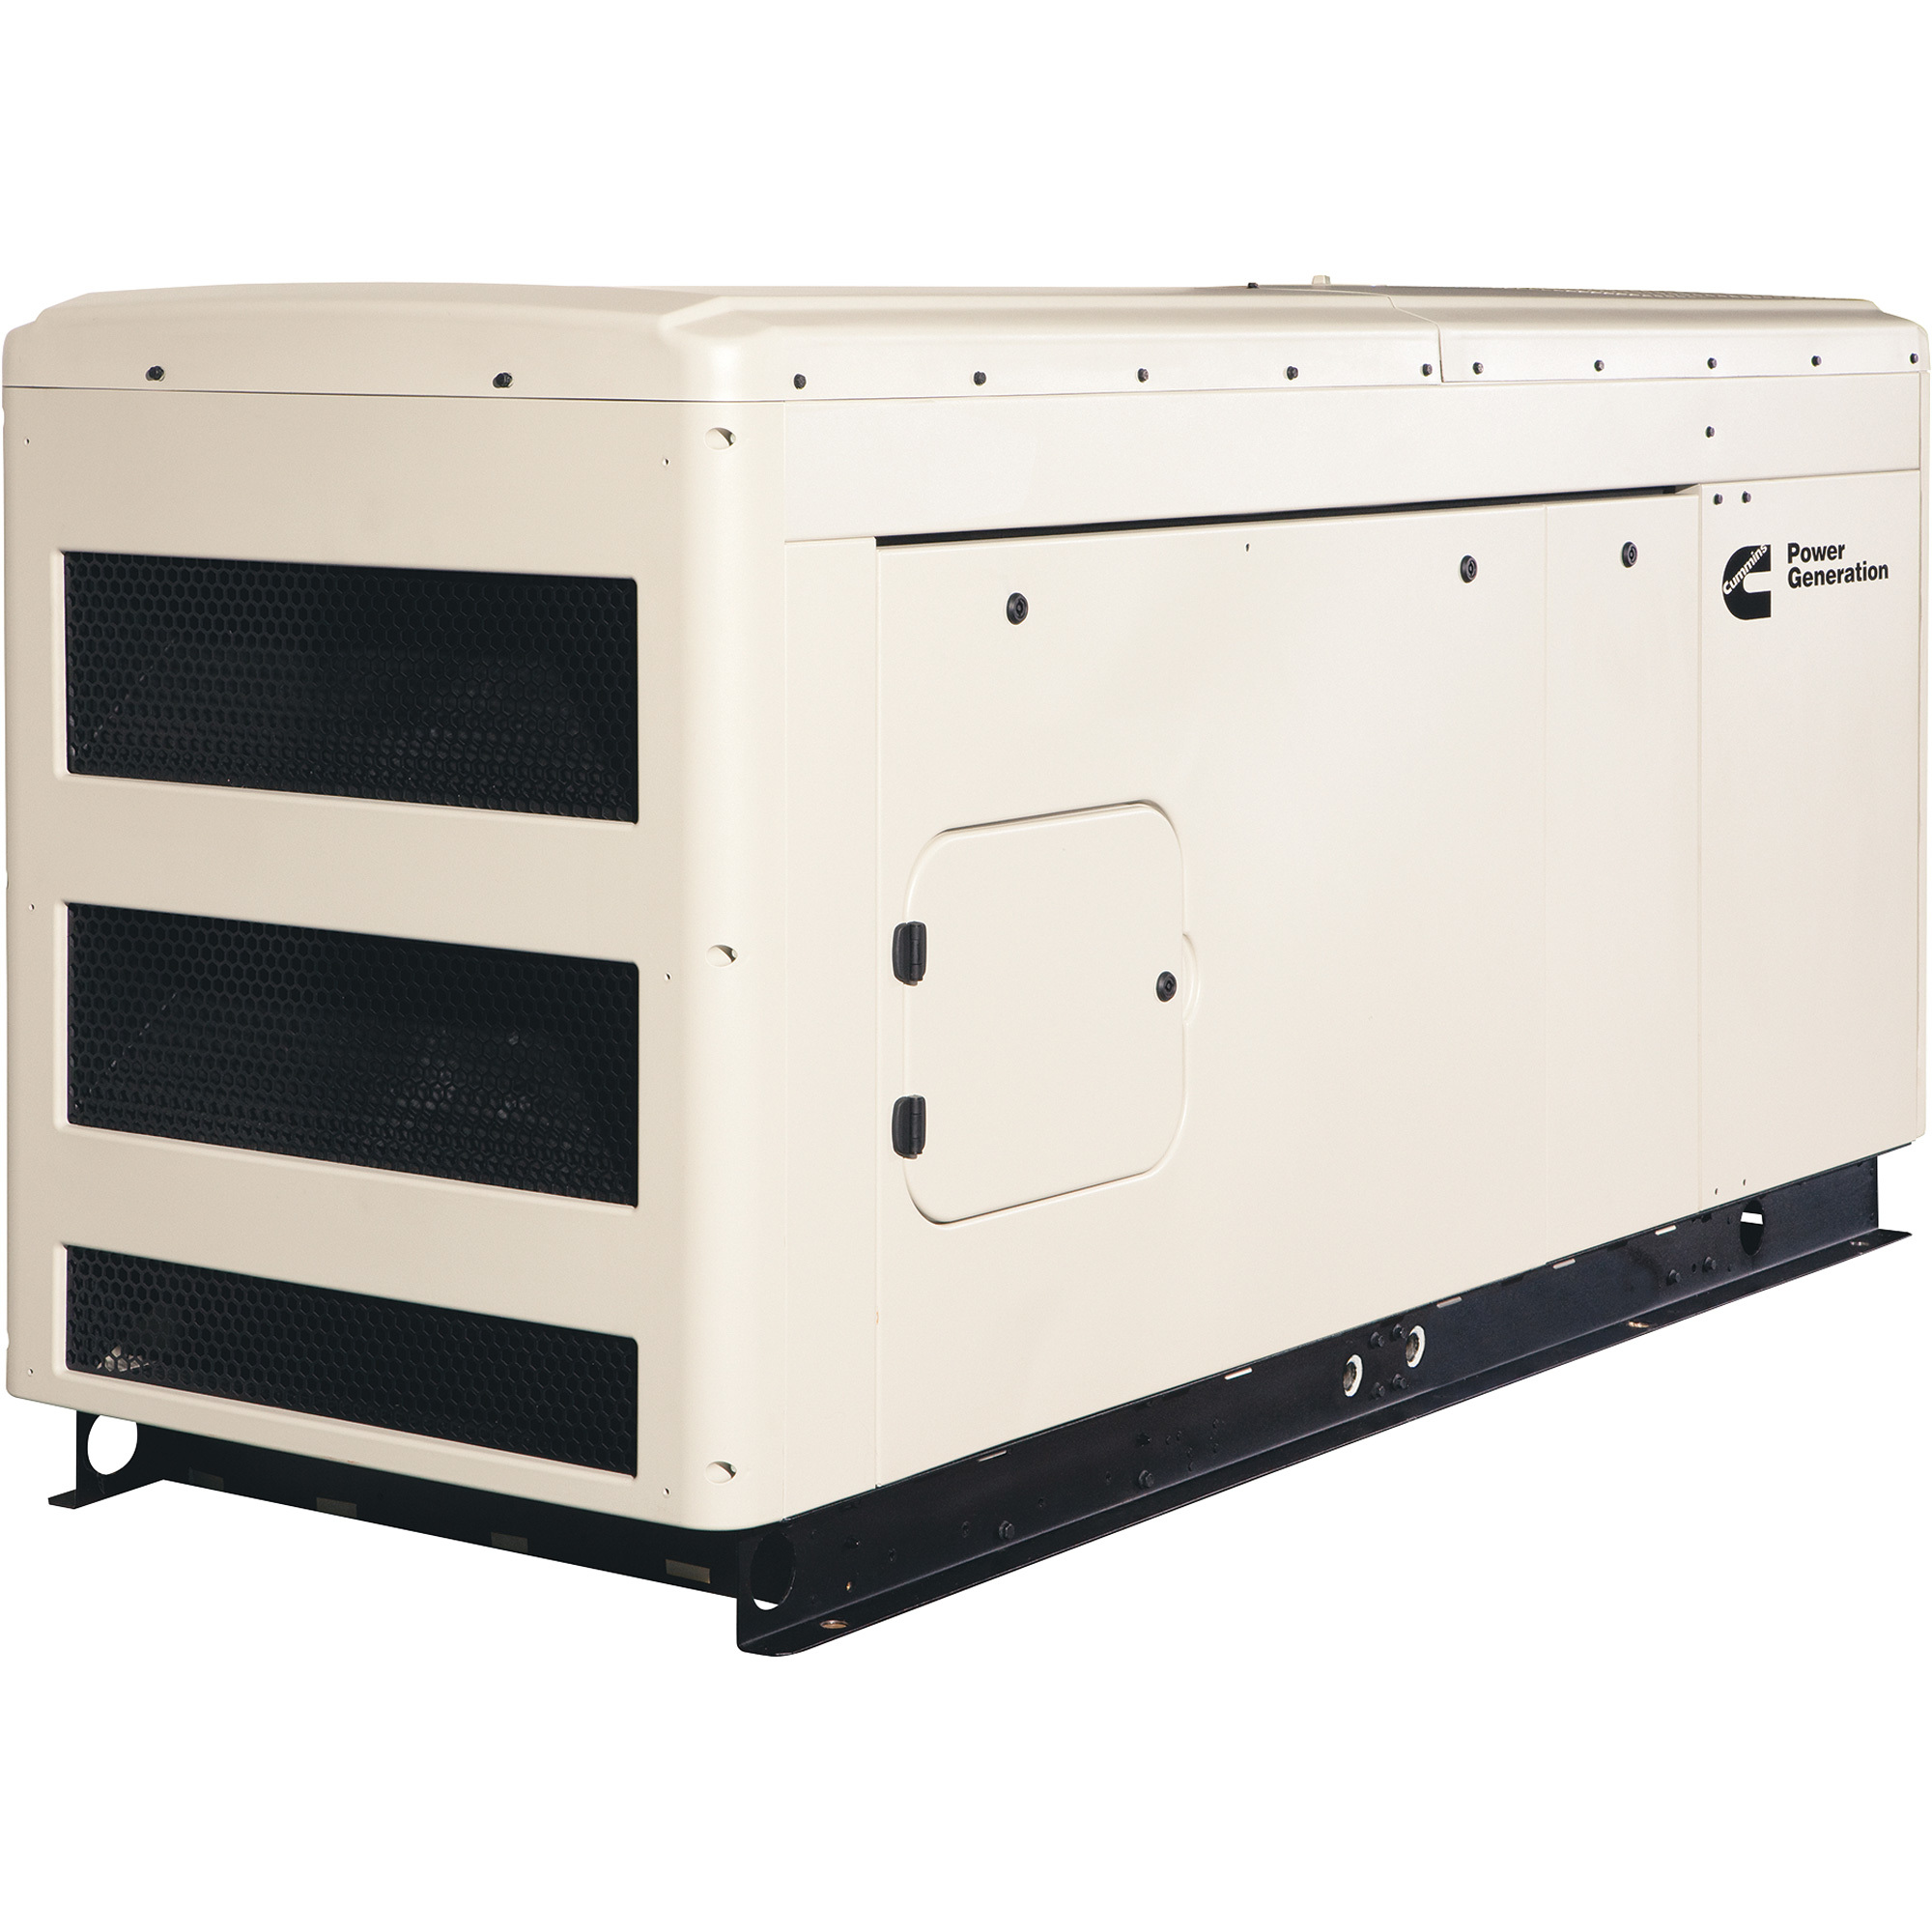 Cummins Commercial Standby Generator 25kW, LP/NG, 120/240 Volts, Single-Phase